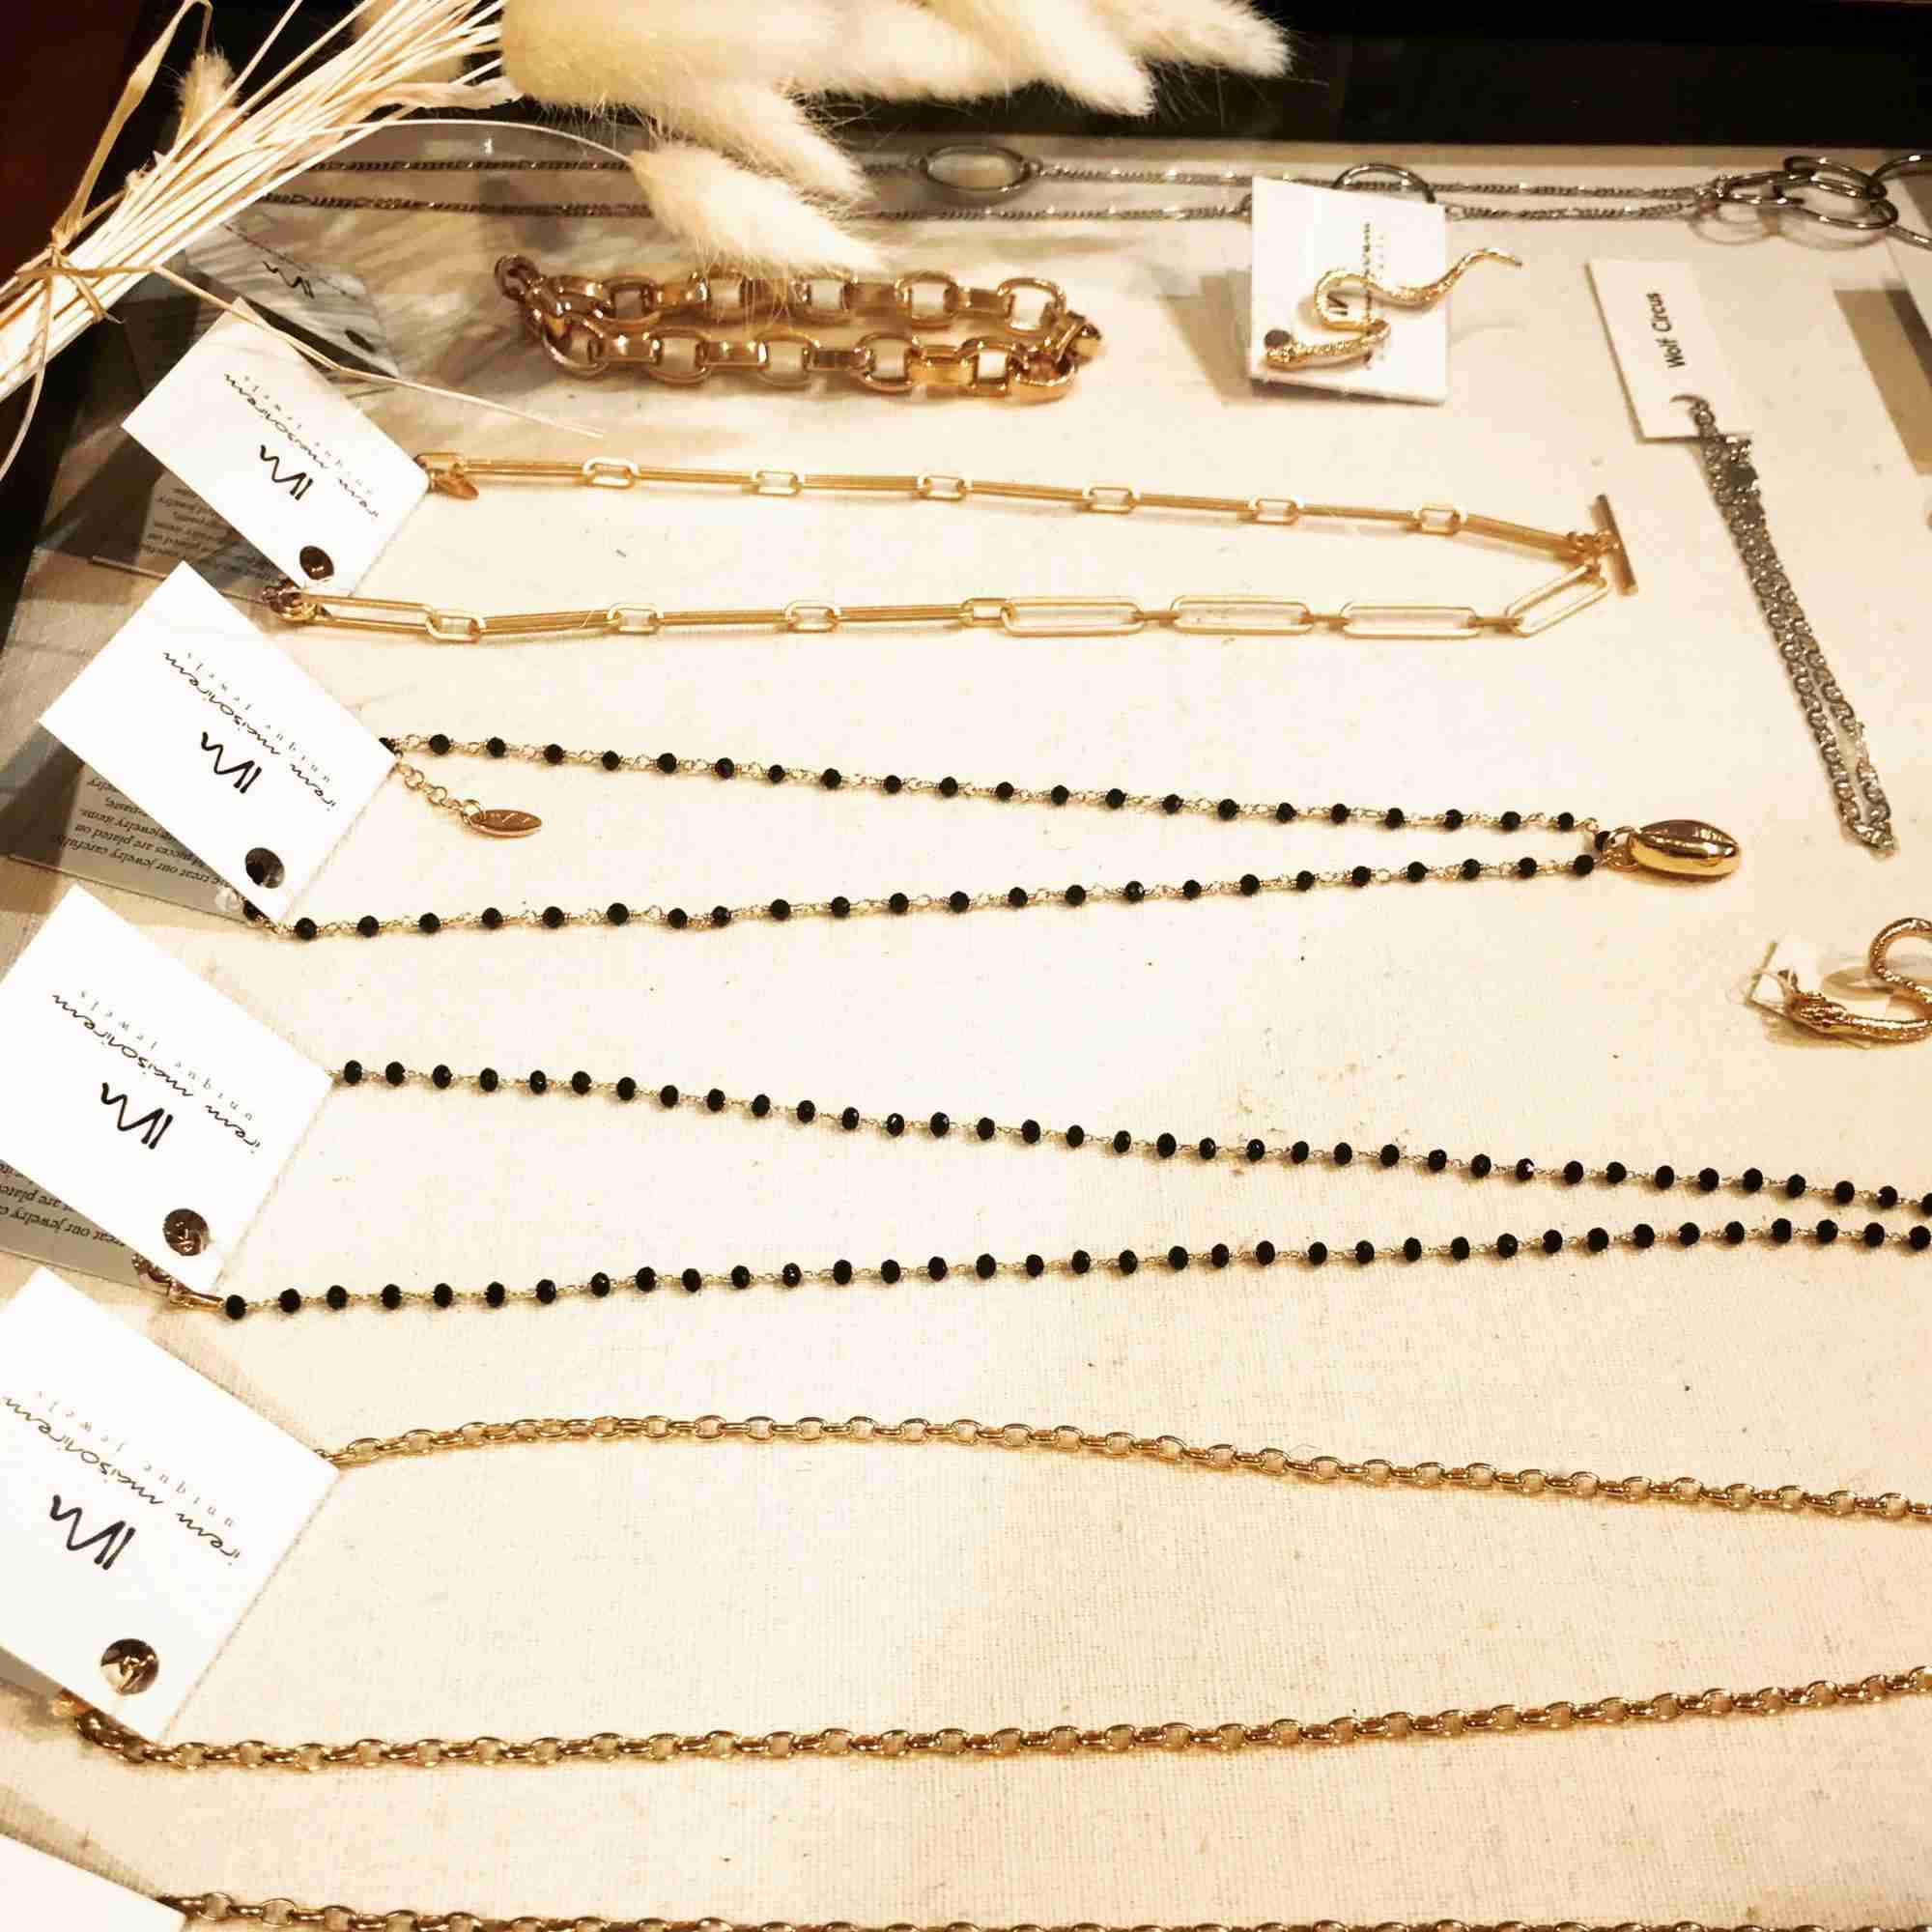 Easy Gifts for Sunny Location Stores – Jewelry Trends at Coastal Boutiques